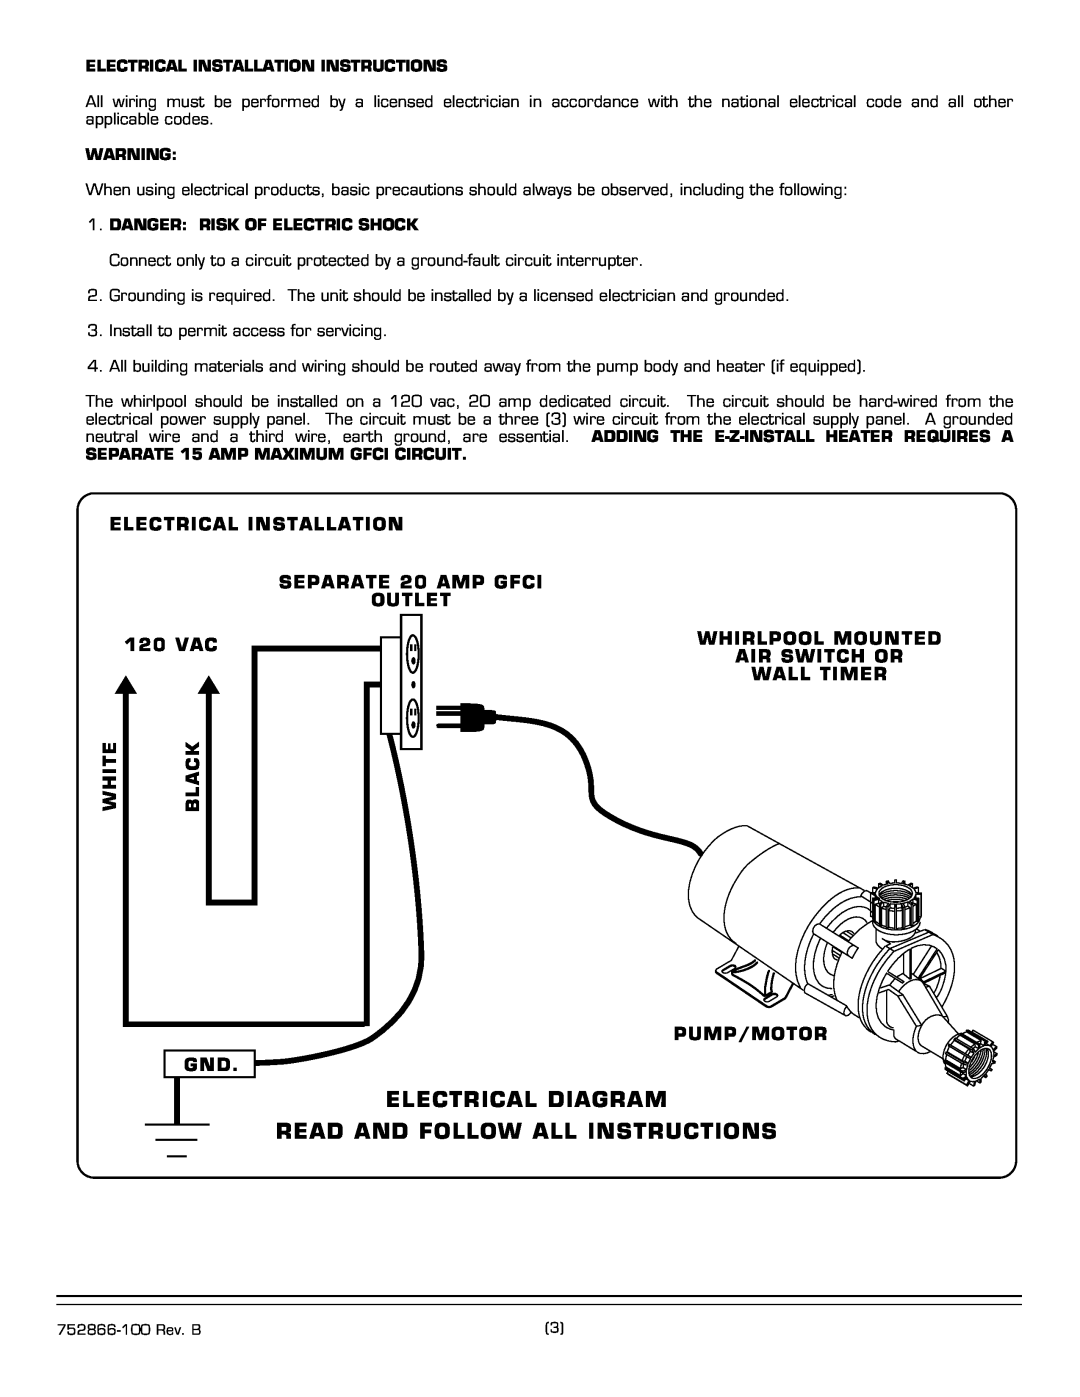 American Standard 2902E installation instructions Electrical Diagram, Read And Follow All Instructions 